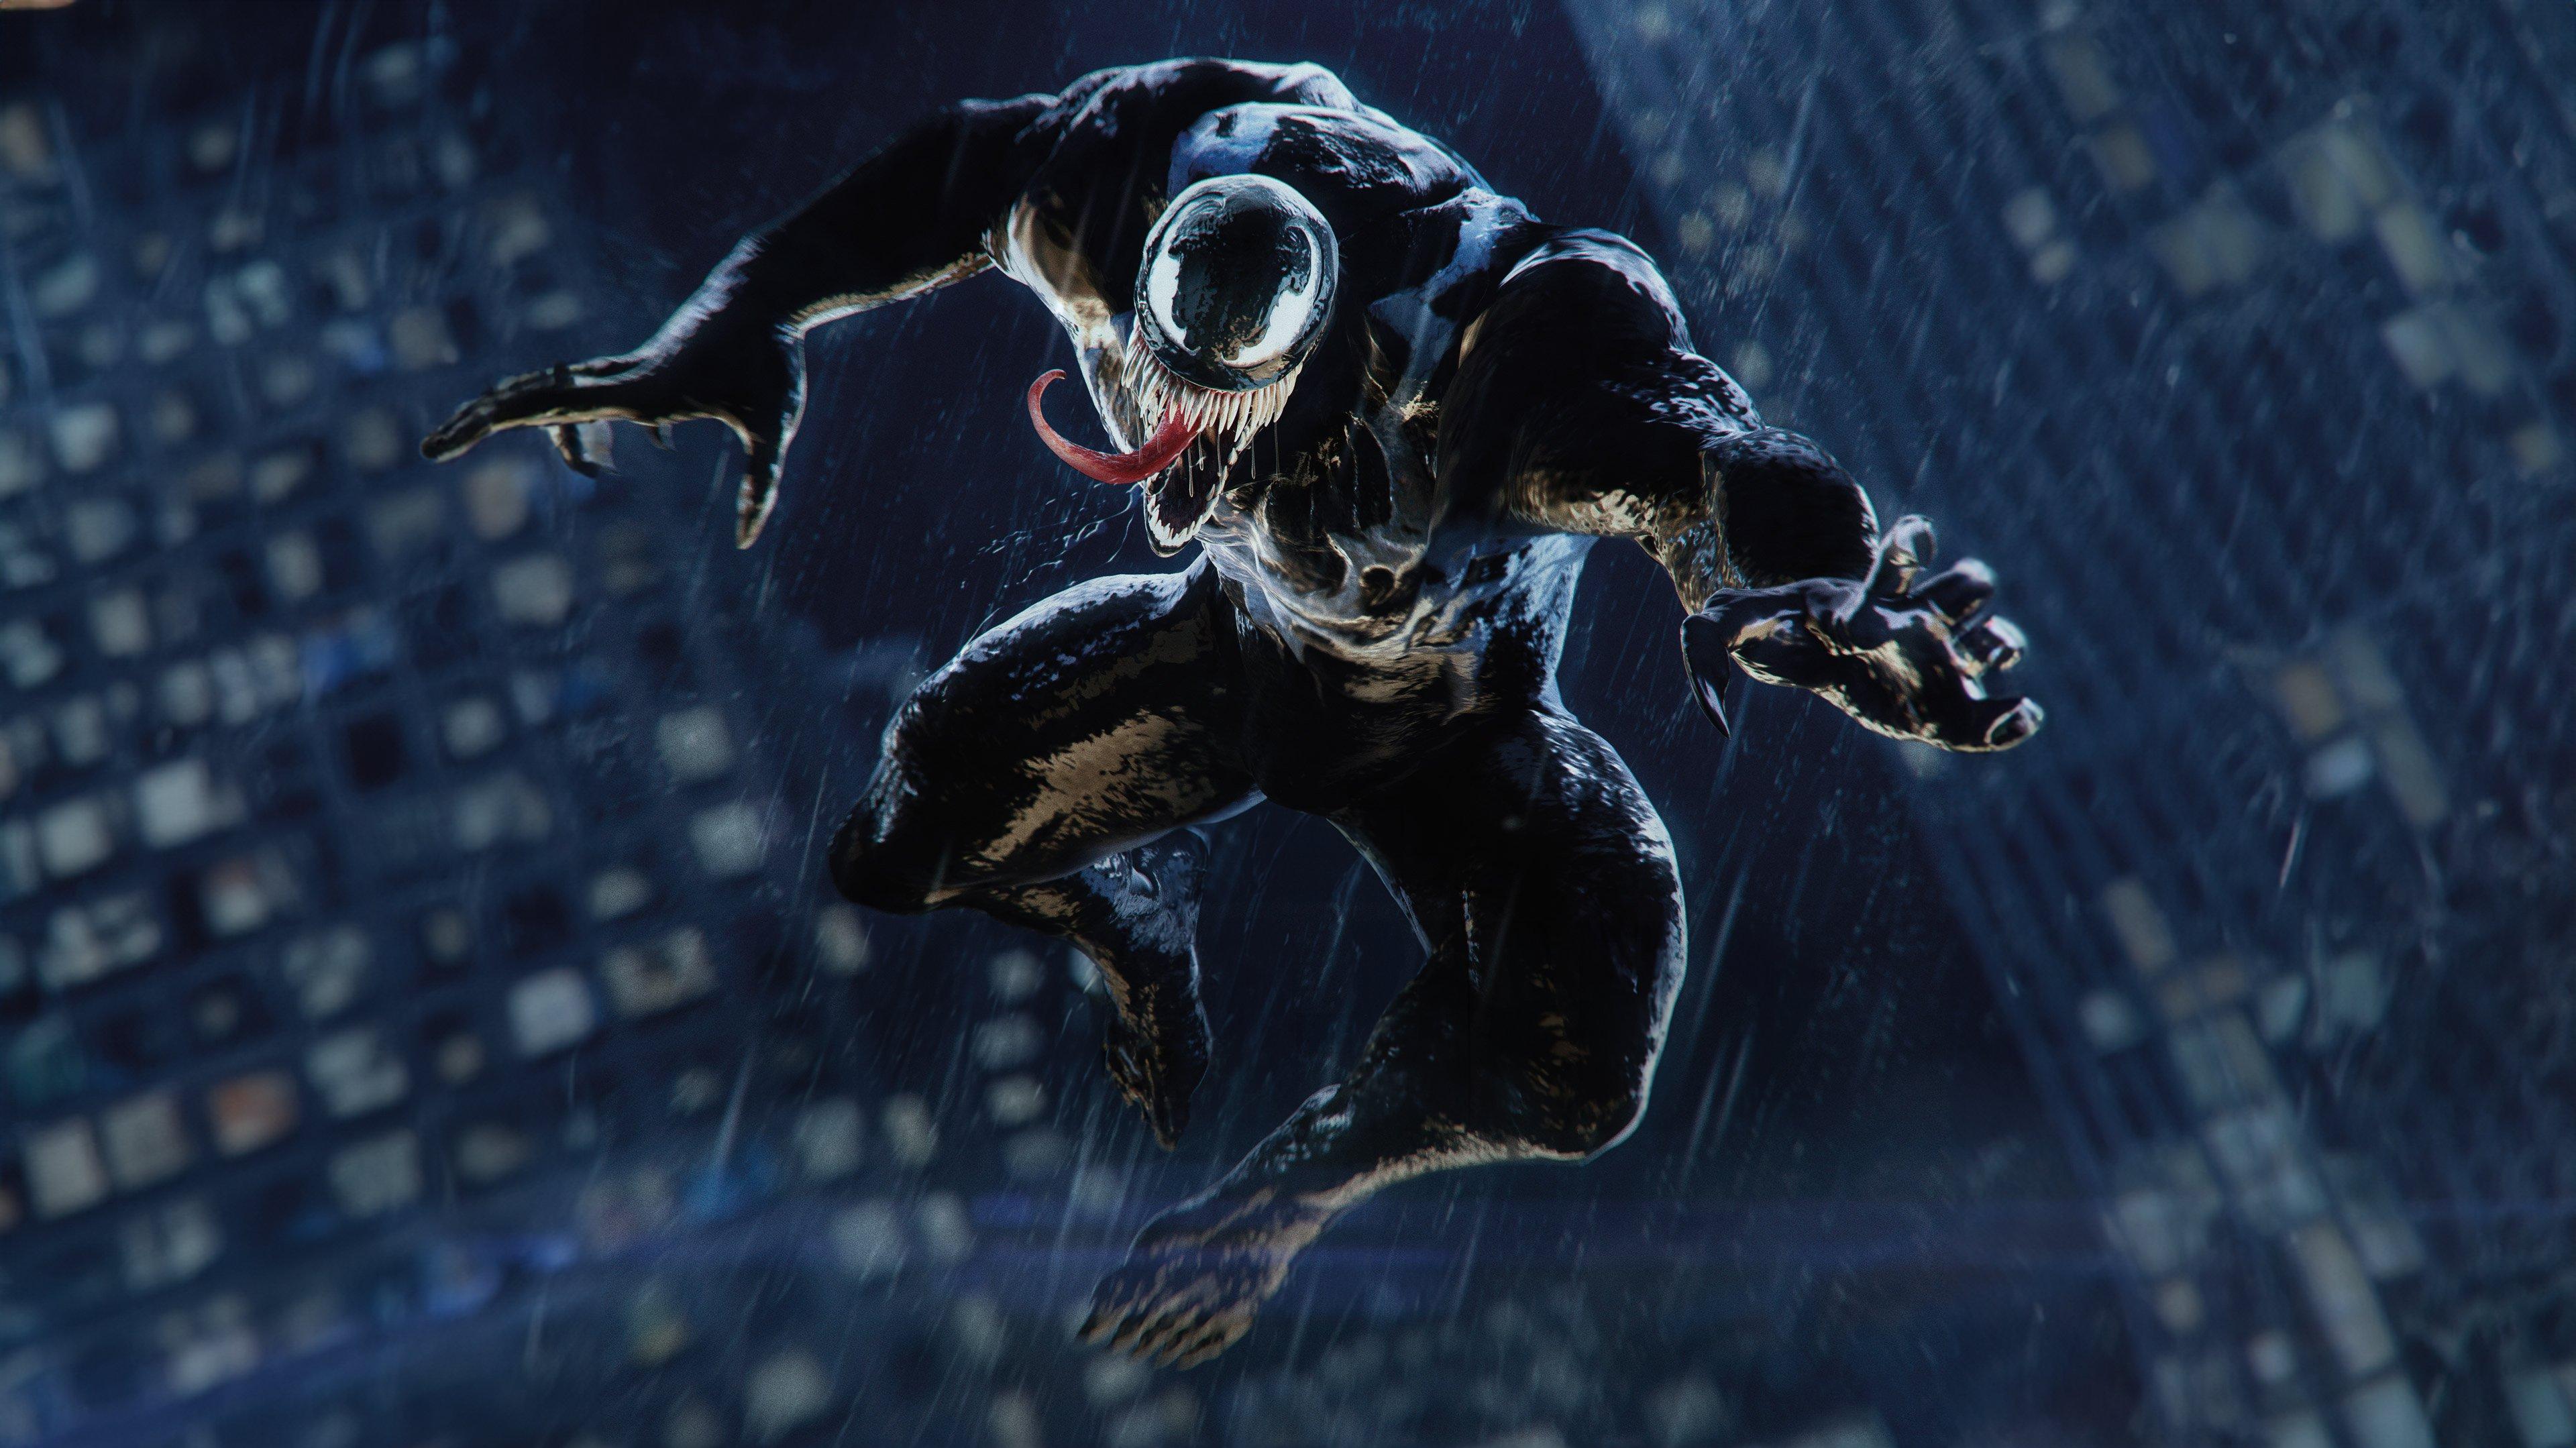 Octorious on X Heres a wide version of the new Venom poster